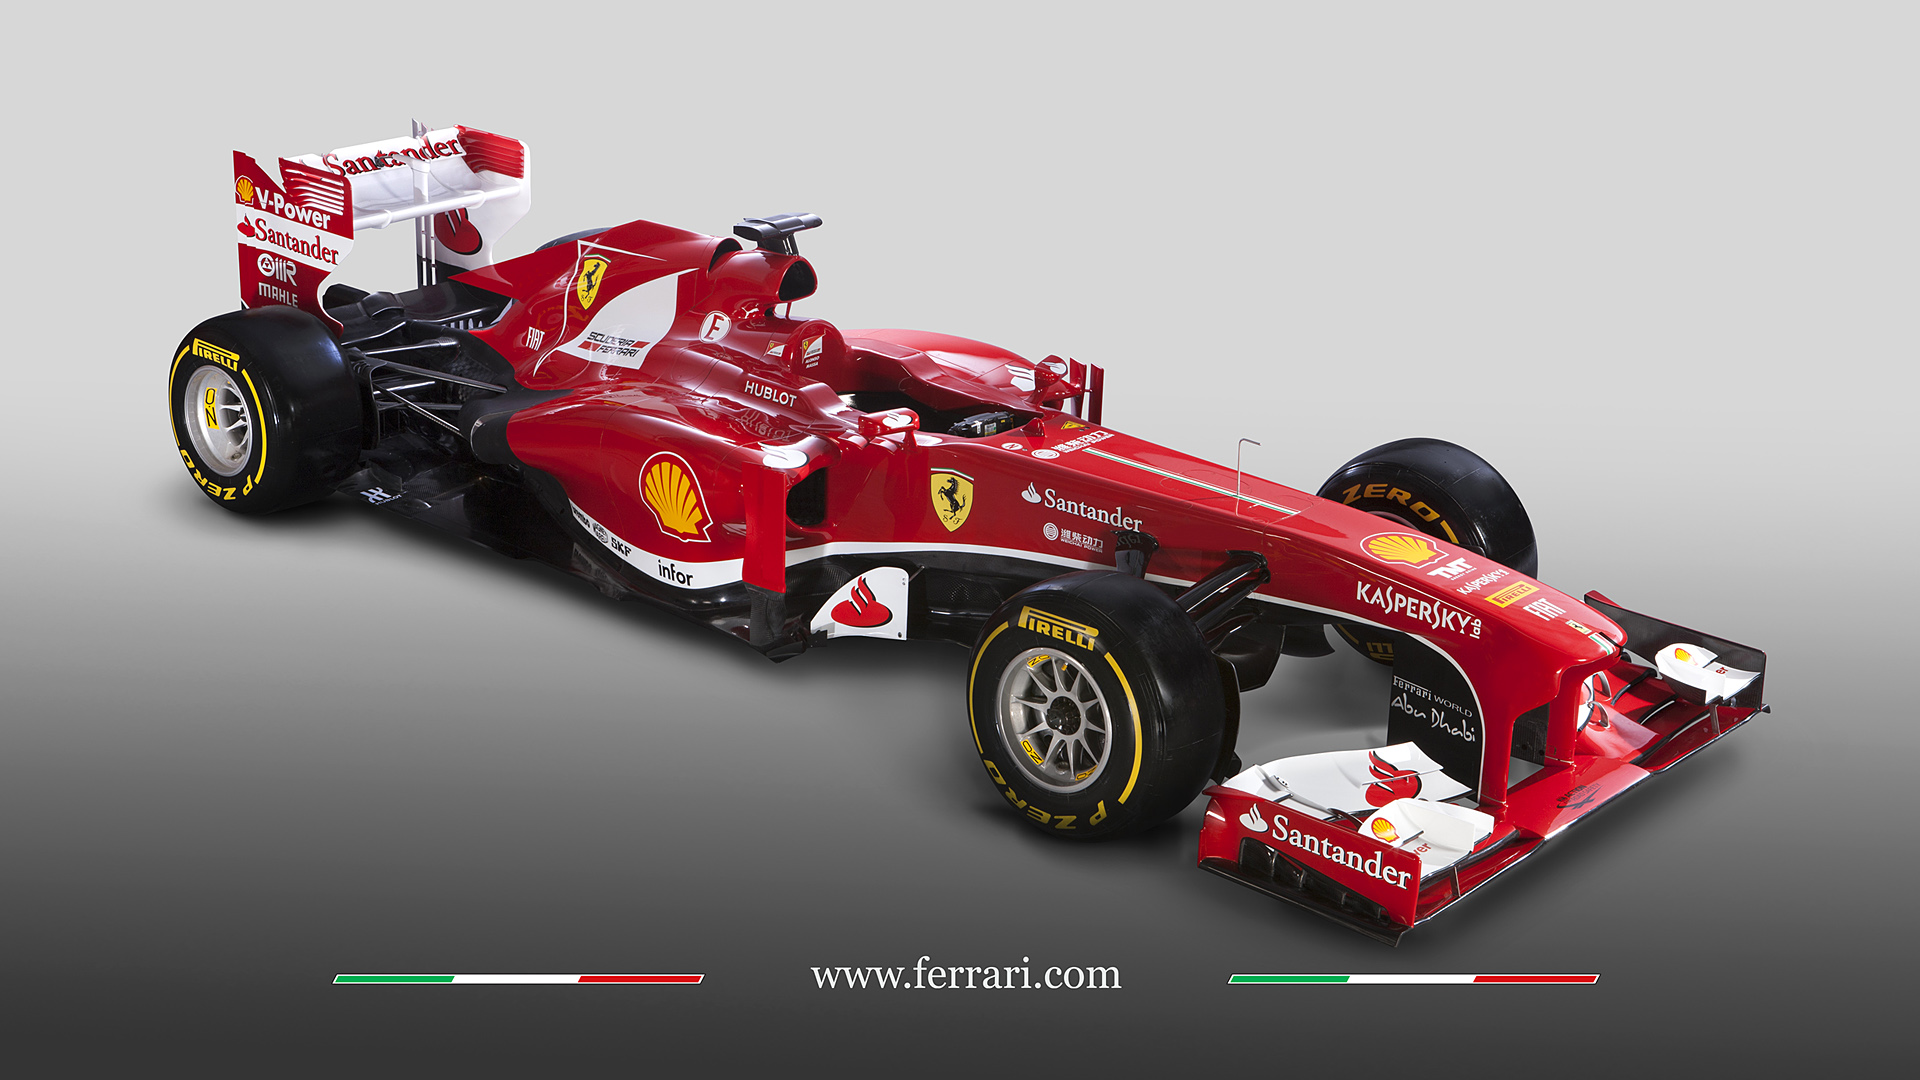 Formula One Full Hd Wallpapers Full HD Wallpapers download 1080p 1920x1080